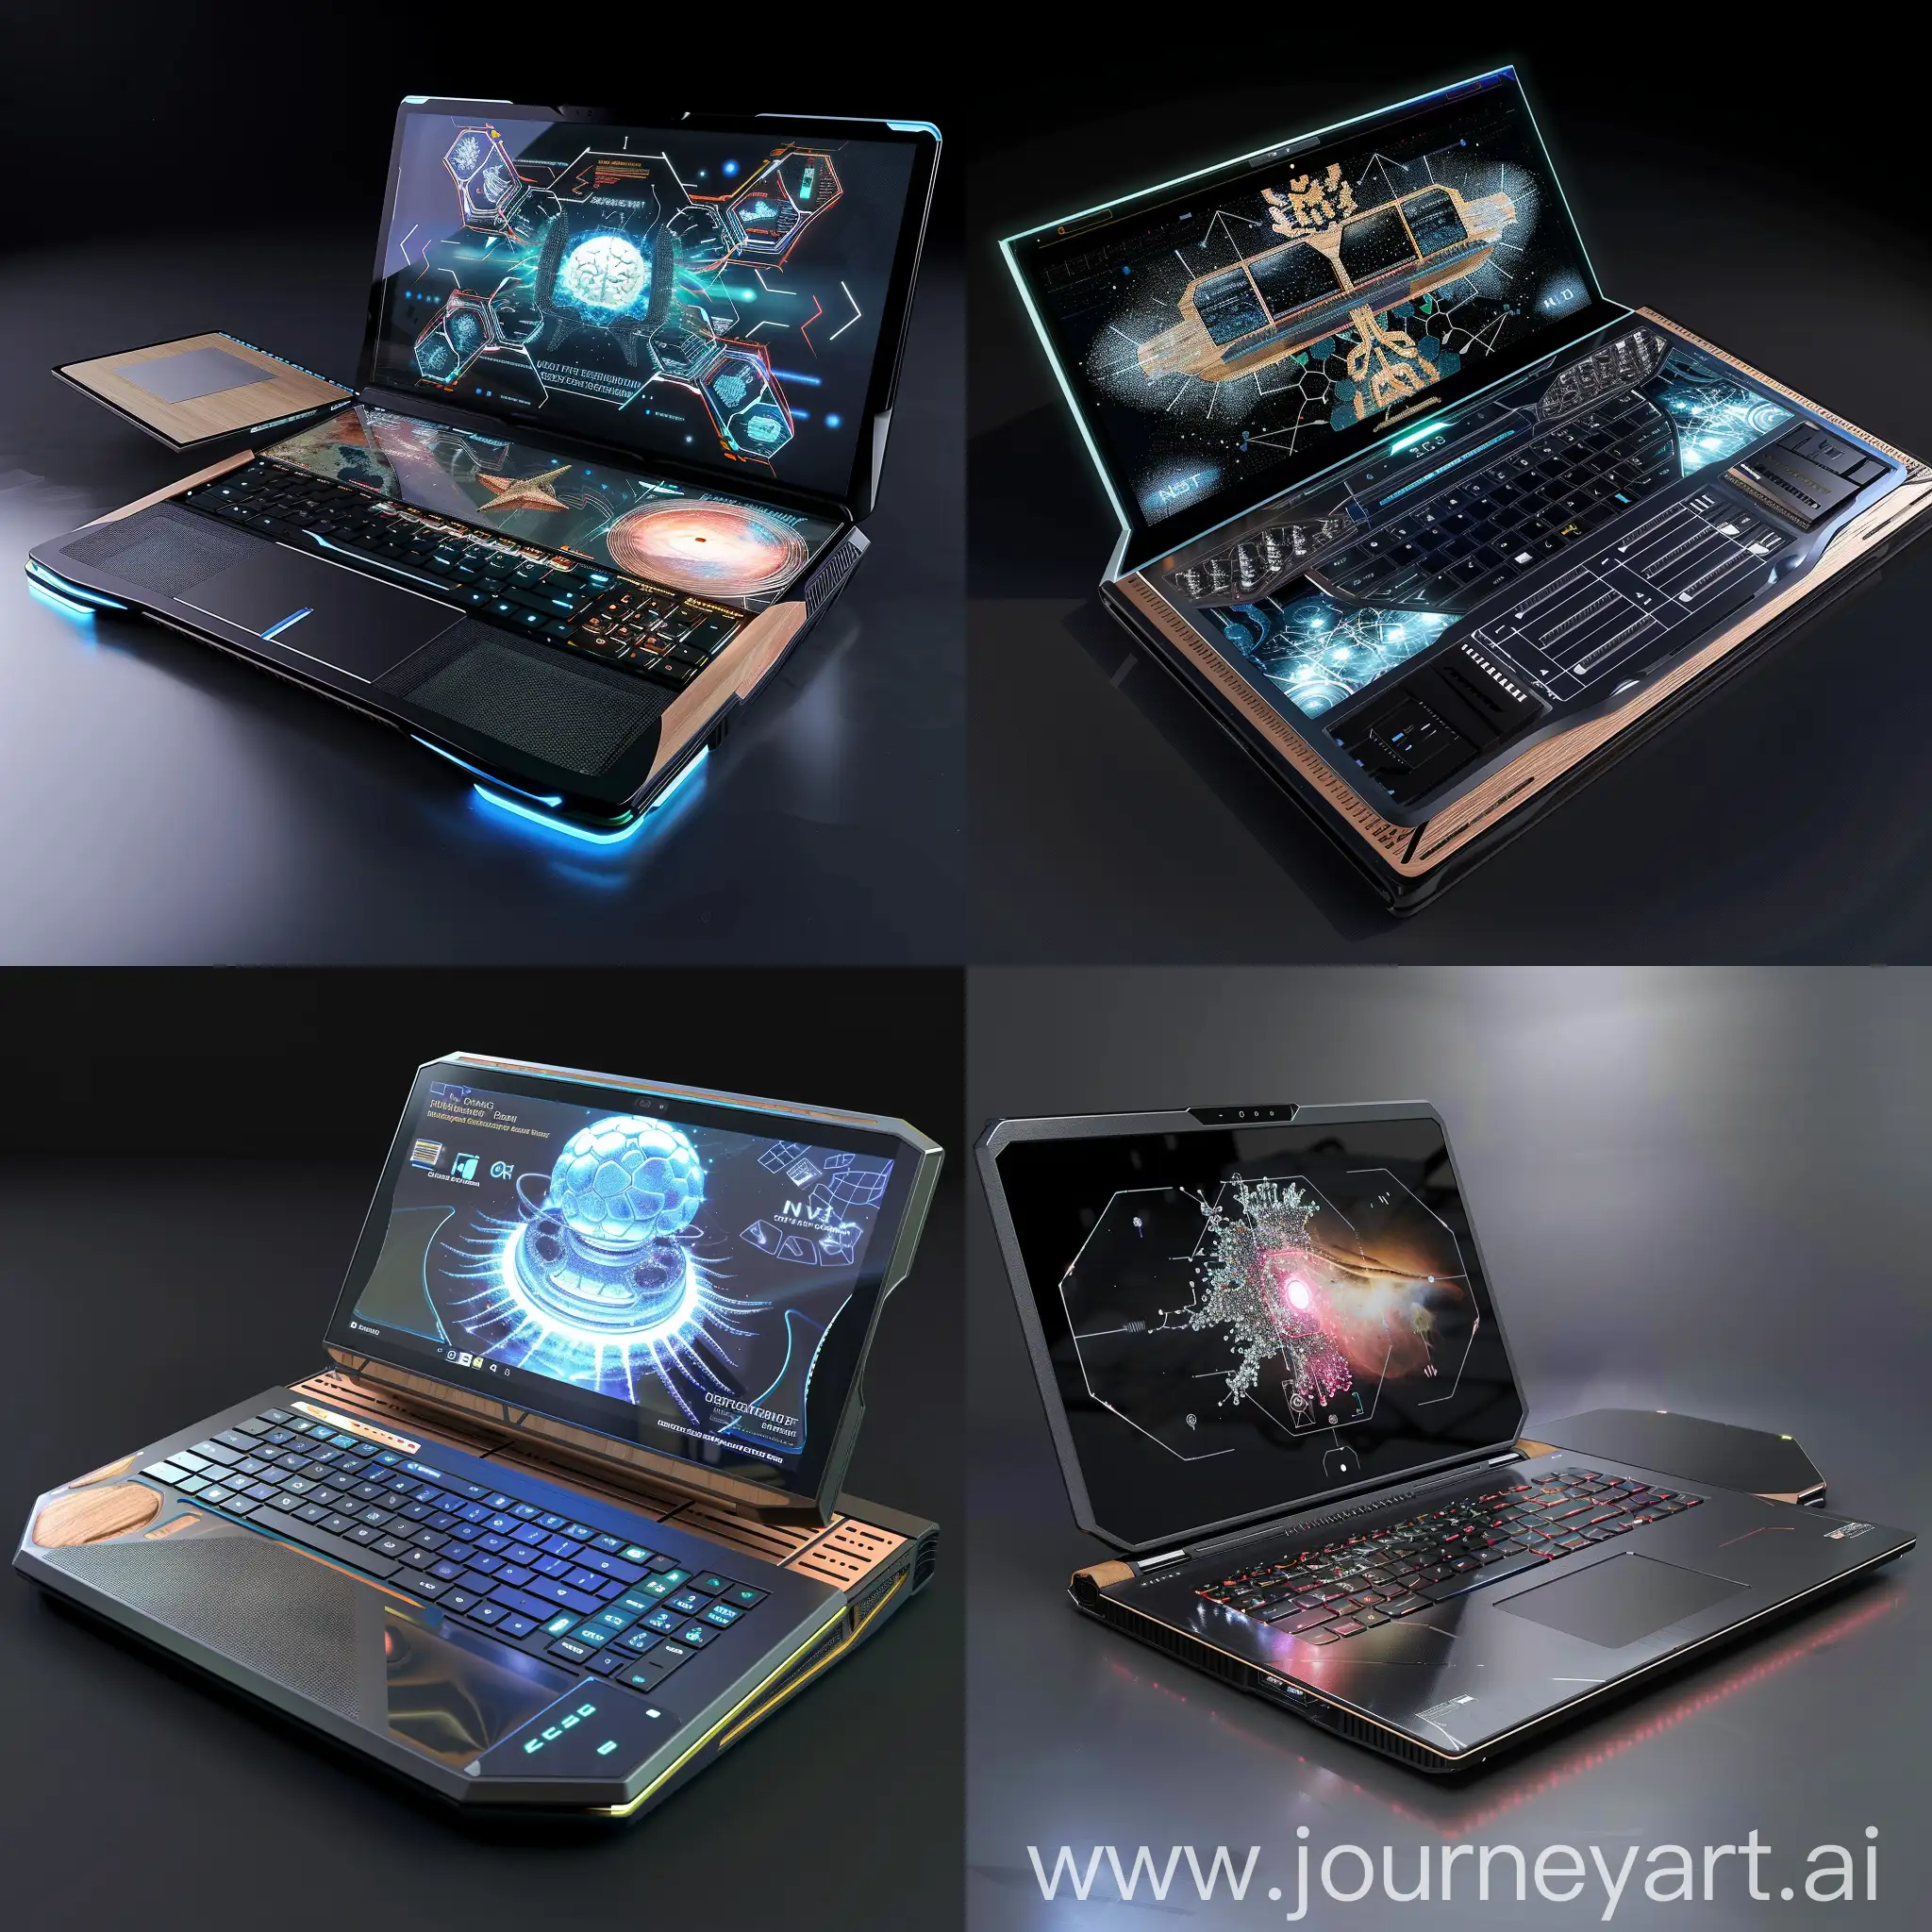 Futuristic laptop, in futuristic style, Quantum Processor, Graphene Cooling System, Neural Processing Unit (NPU), Quantum Dot Display, Holographic Projection Interface, DNA Data Storage, Optical Neural Interface, Room Temperature Superconductors, Self-repairing Materials, Biometric Authentication Integration, Flexible OLED Display, Transparent Touchpad/Keyboard, Lightweight Carbon Nanotube Chassis, Holographic Projection Hub, Modular Expansion Ports, Integrated Solar Panels, Dynamic E-Ink Cover, 360-Degree Rotating Hinge, Immersive Surround Sound System, Biometric Sensing Surfaces, Bamboo Fiber Chassis, Recycled Aluminum Alloy Frame, Bioplastic Keyboard, Organic Polymer Battery, Circuit Boards with Recycled Copper, Sustainable Display Materials, Biodegradable Thermal Interface Materials, Soy-Based Adhesives, Natural Fiber Packaging, Eco-Friendly Packaging Ink, Recycled Aluminum Alloy Body, Biodegradable Plastic Shell, Wooden Accents, Cork or Bamboo Trackpad, Recycled PET Fabric for Keyboard Cover, Natural Fiber Screen Bezels, Plant-Based Rubber Feet, Recyclable Metal Hinges, Eco-Friendly Screen Coating, Sustainable Packaging Materials, unreal engine 5 --stylize 1000